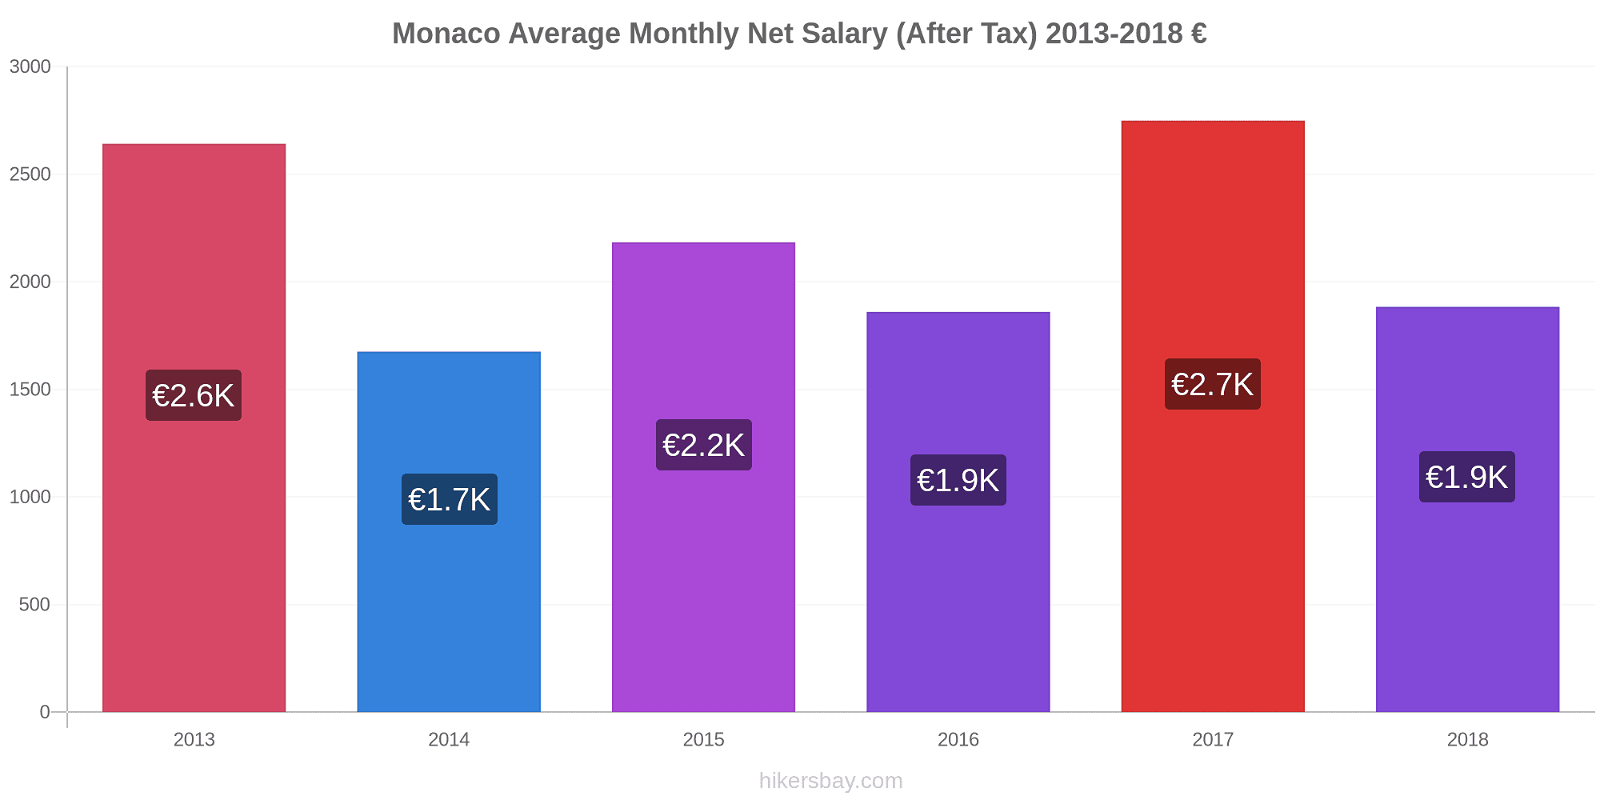 Monaco price changes Average Monthly Net Salary (After Tax) hikersbay.com